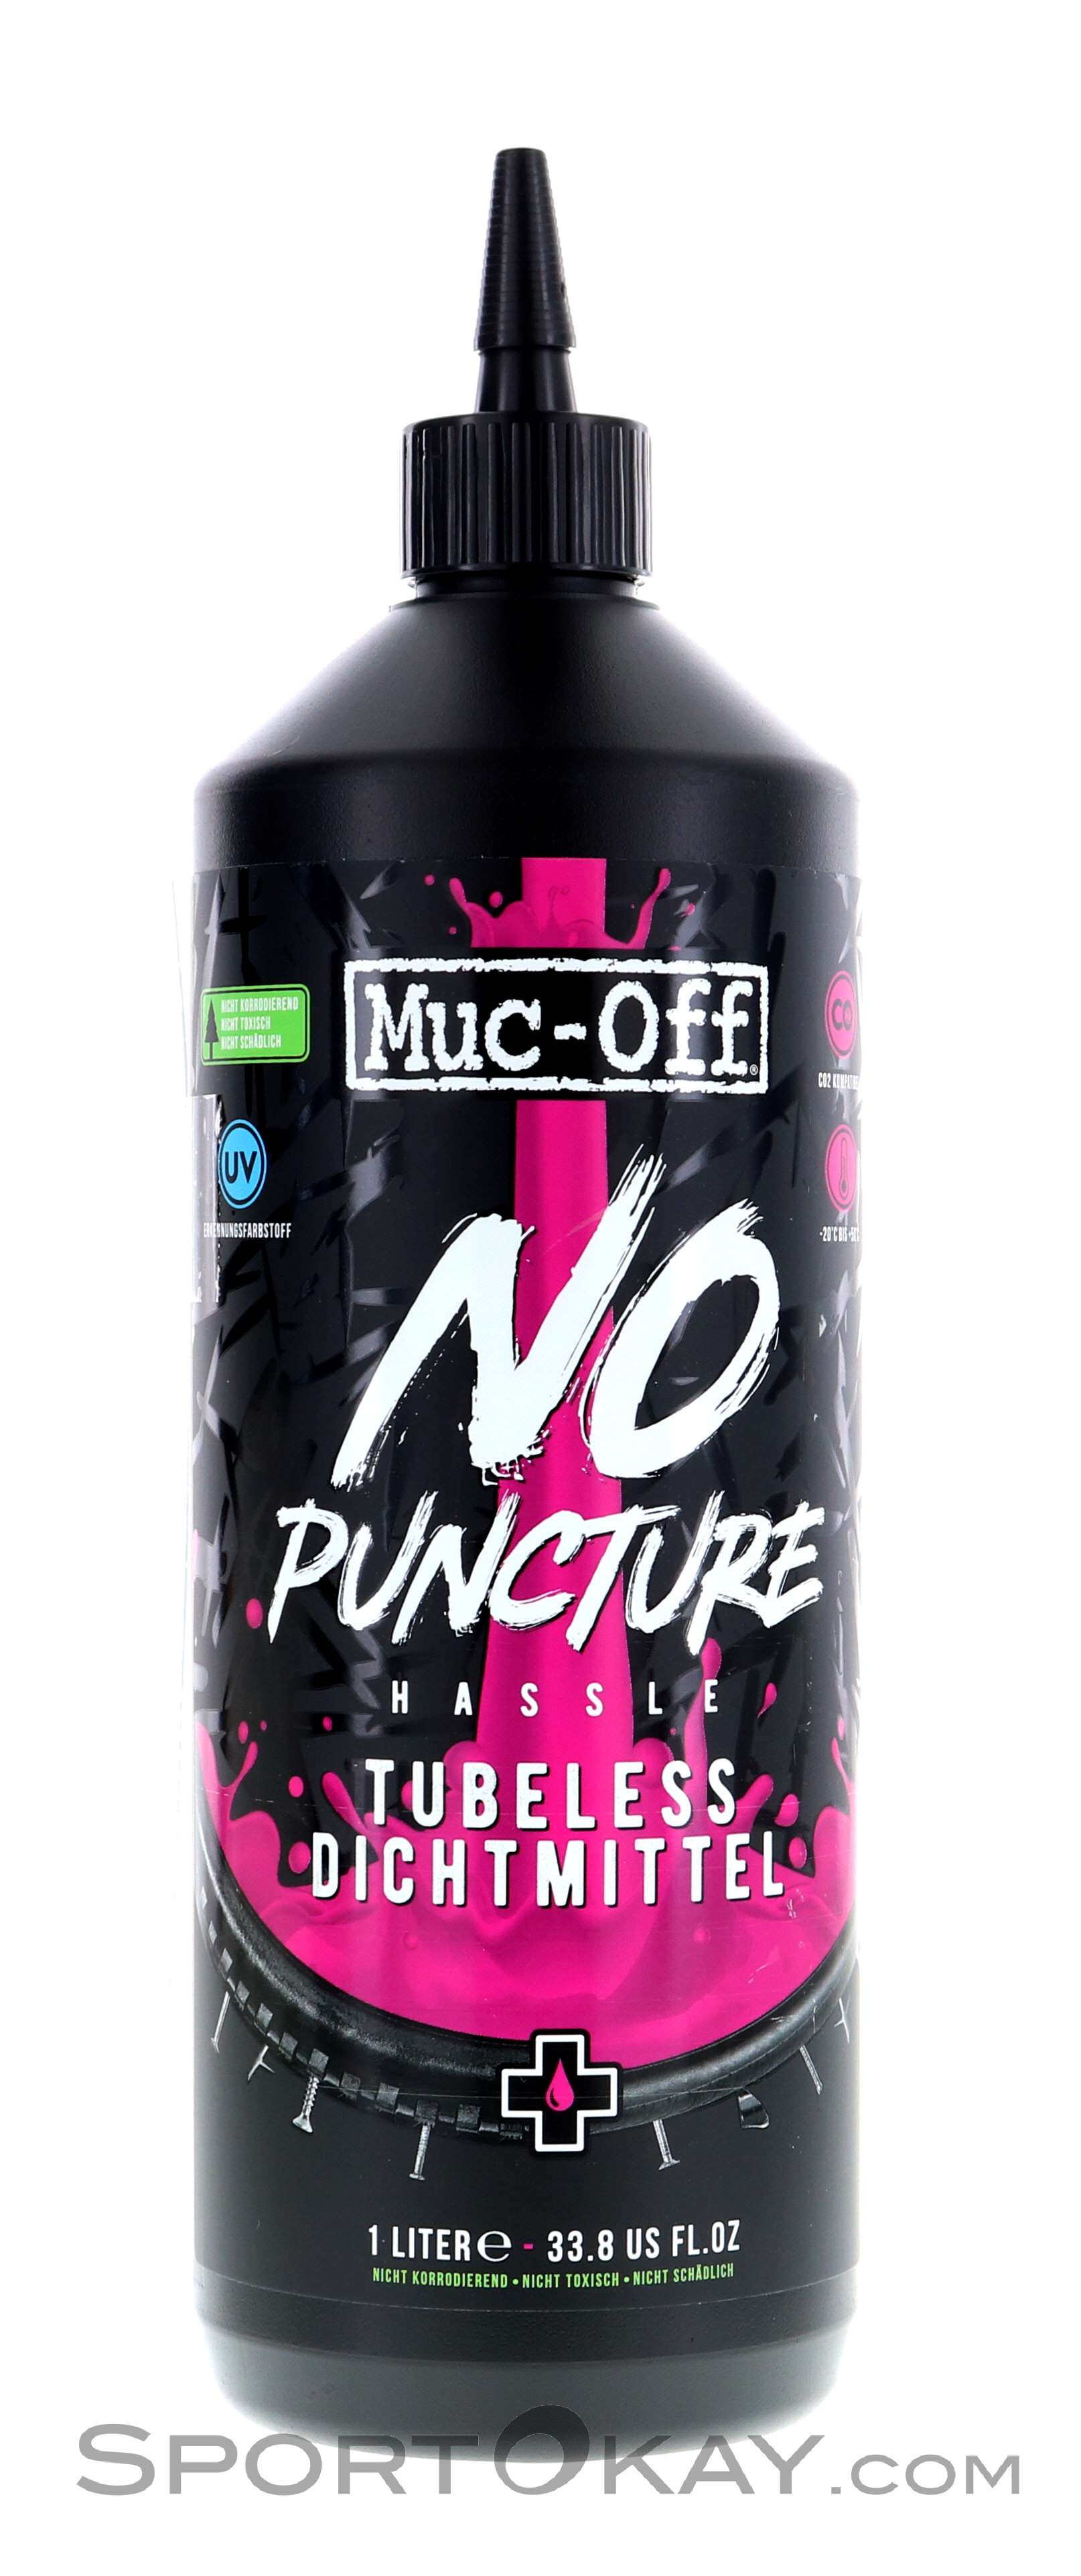 Muc Off No Puncture Hassle 1l Sealant Tire Repair Kits Tools  Care  Bike All